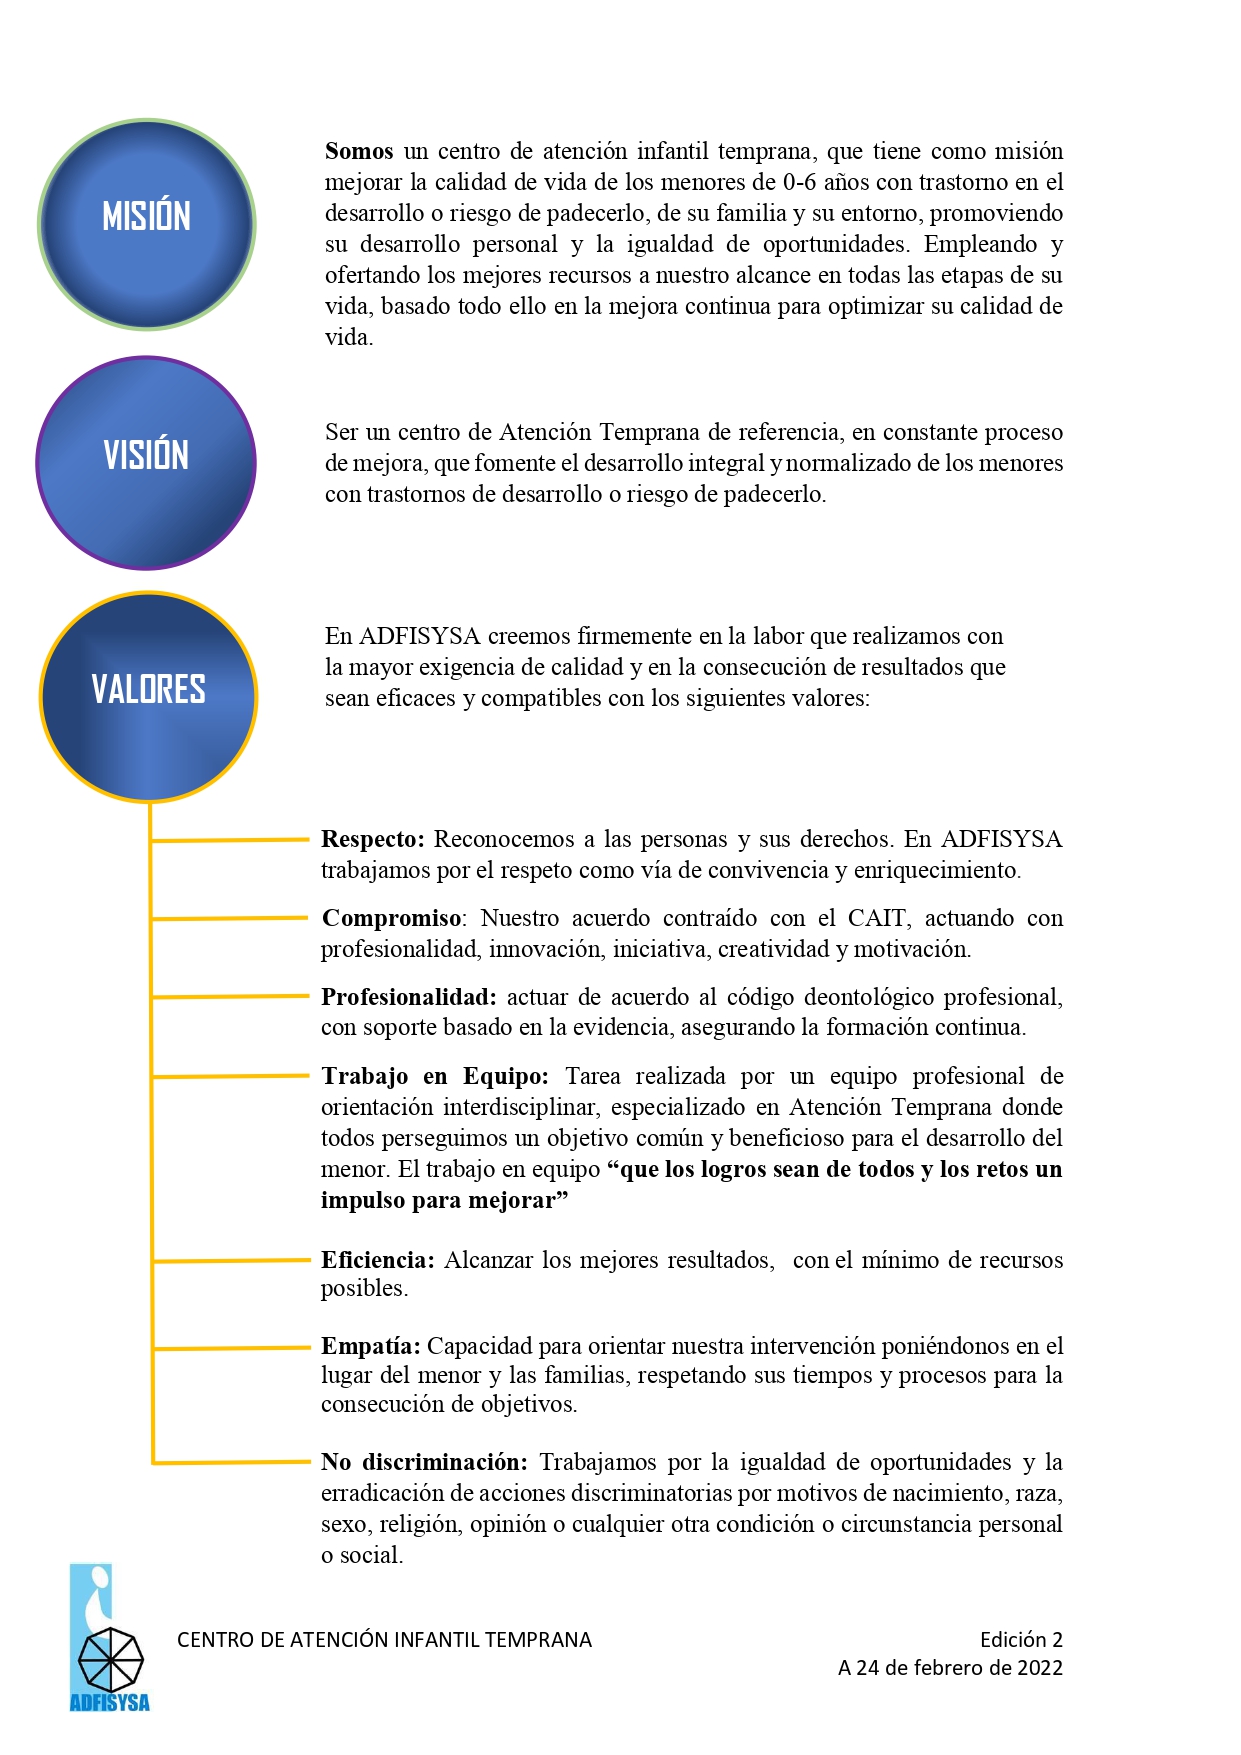 MISION Y VALORES CAIT ADFISYSA_page-0001